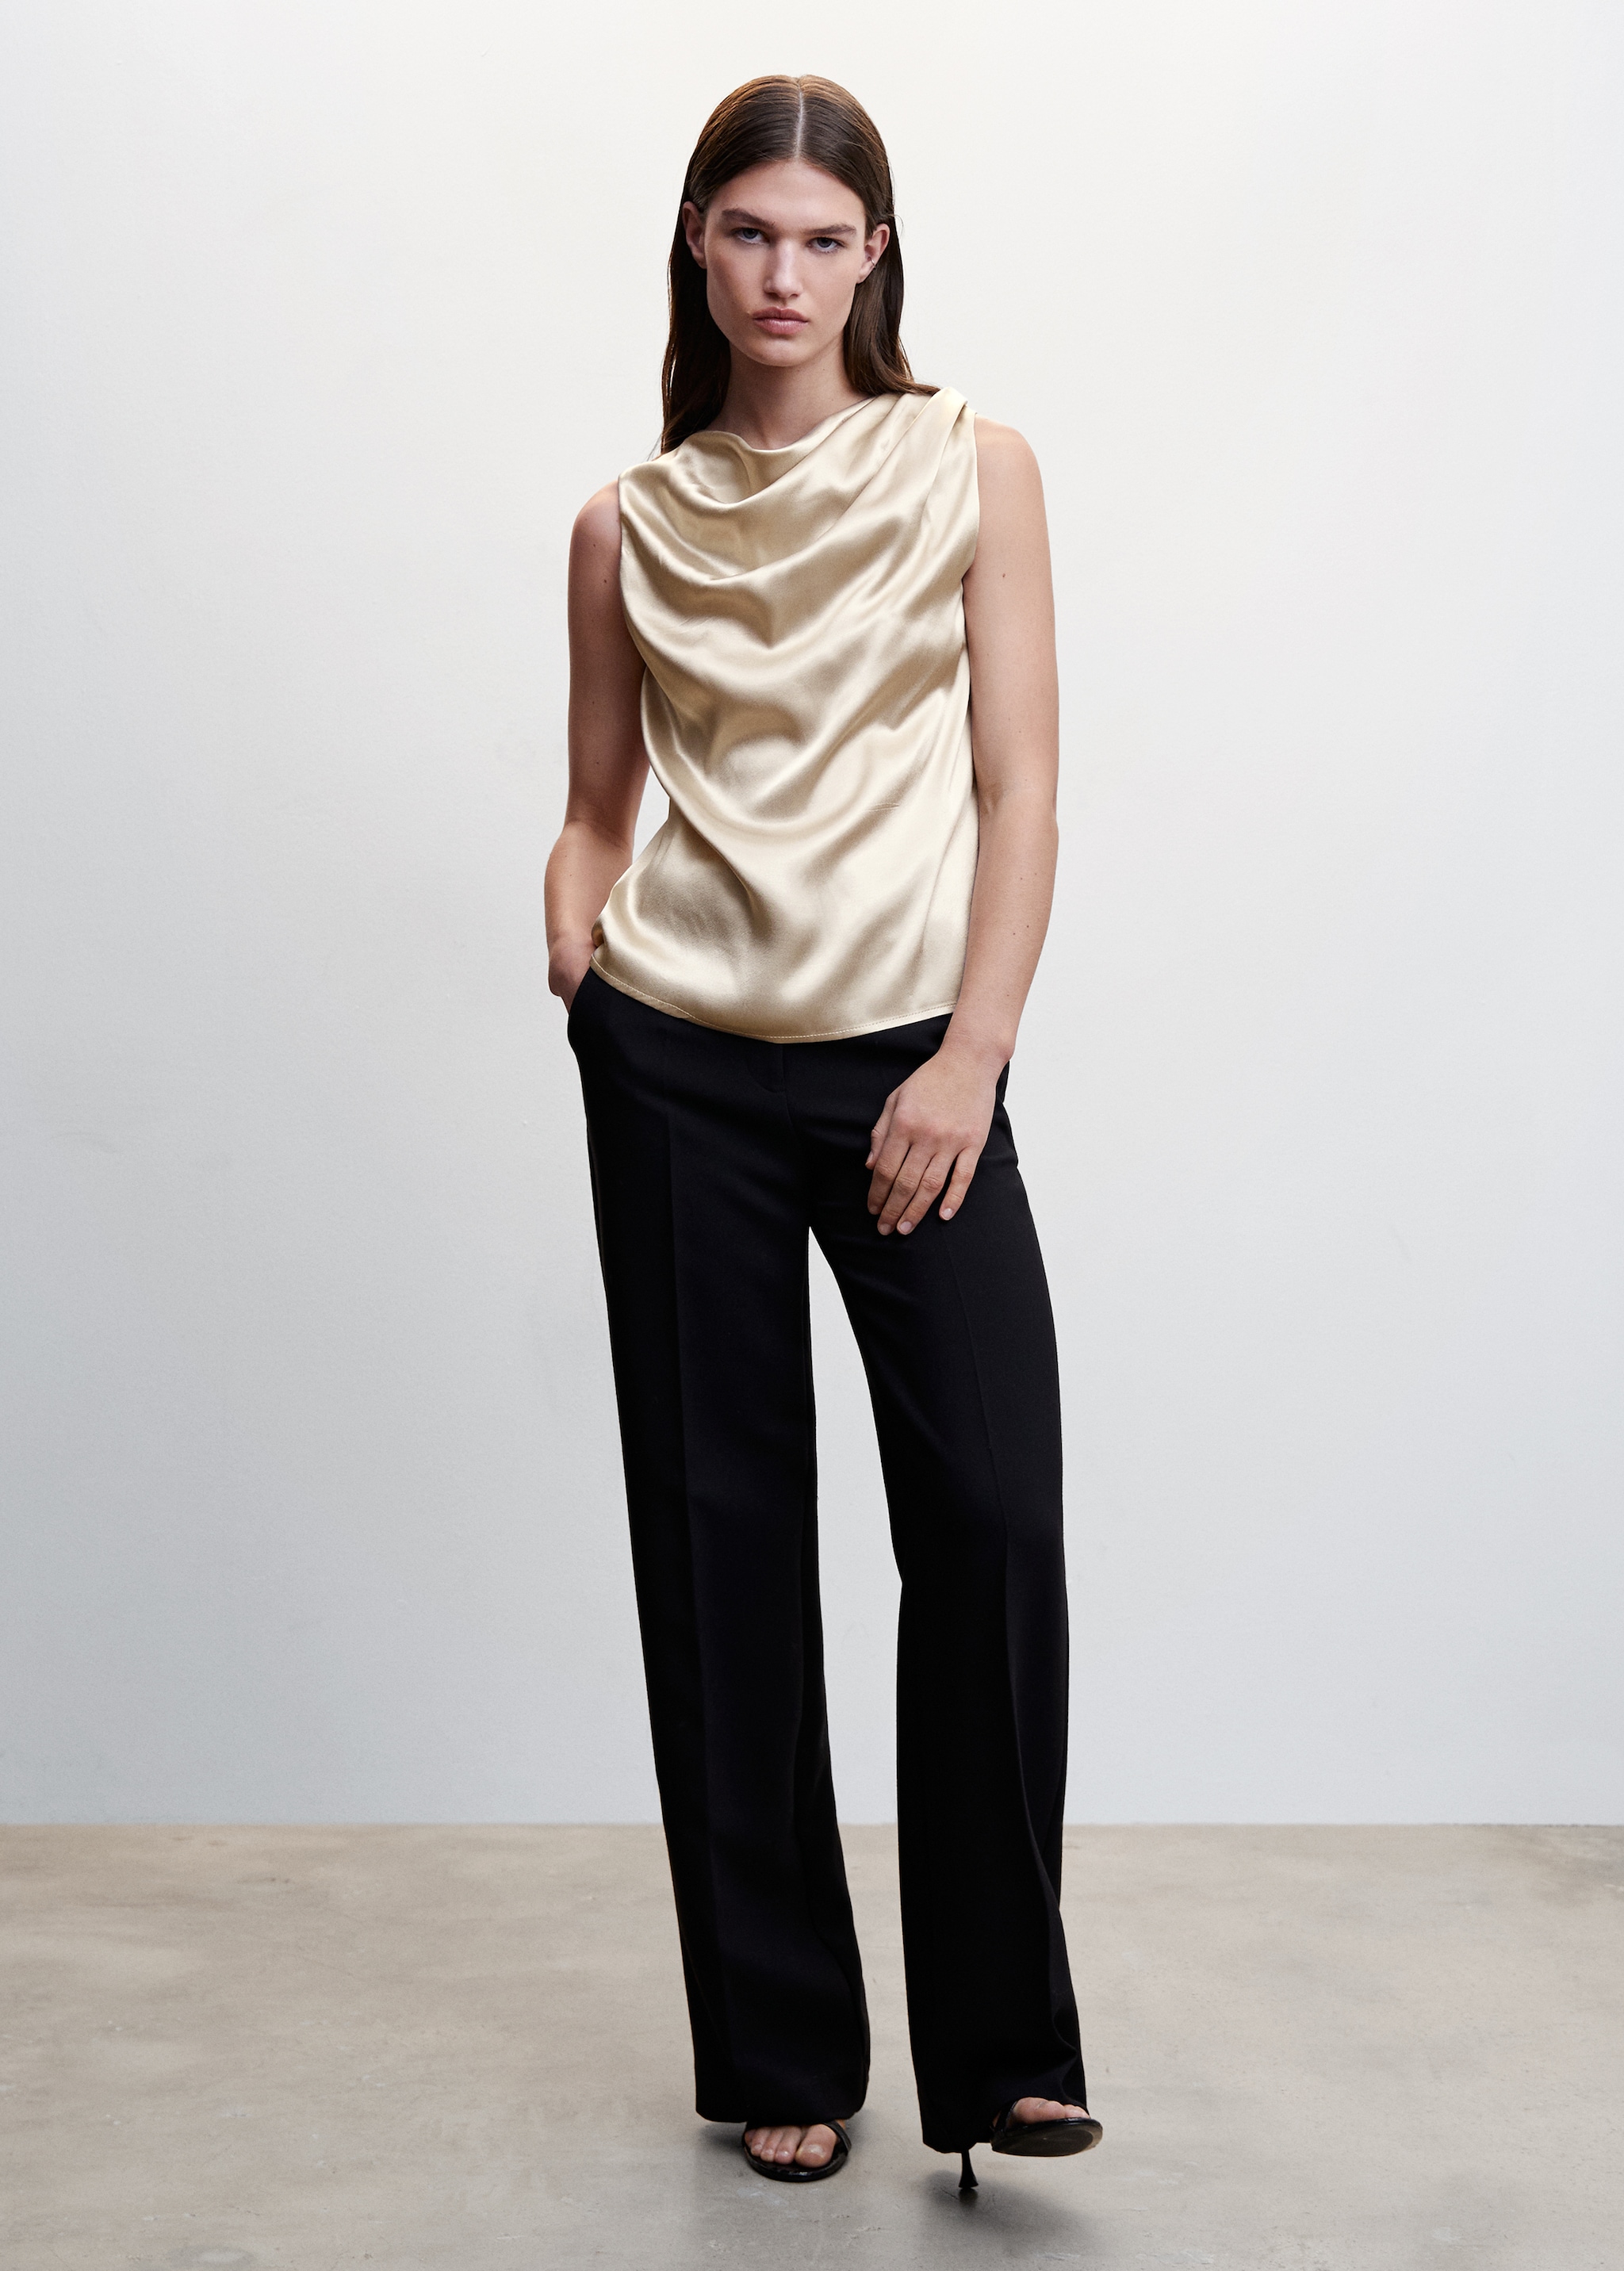 Satin blouse with draped neck  - General plane